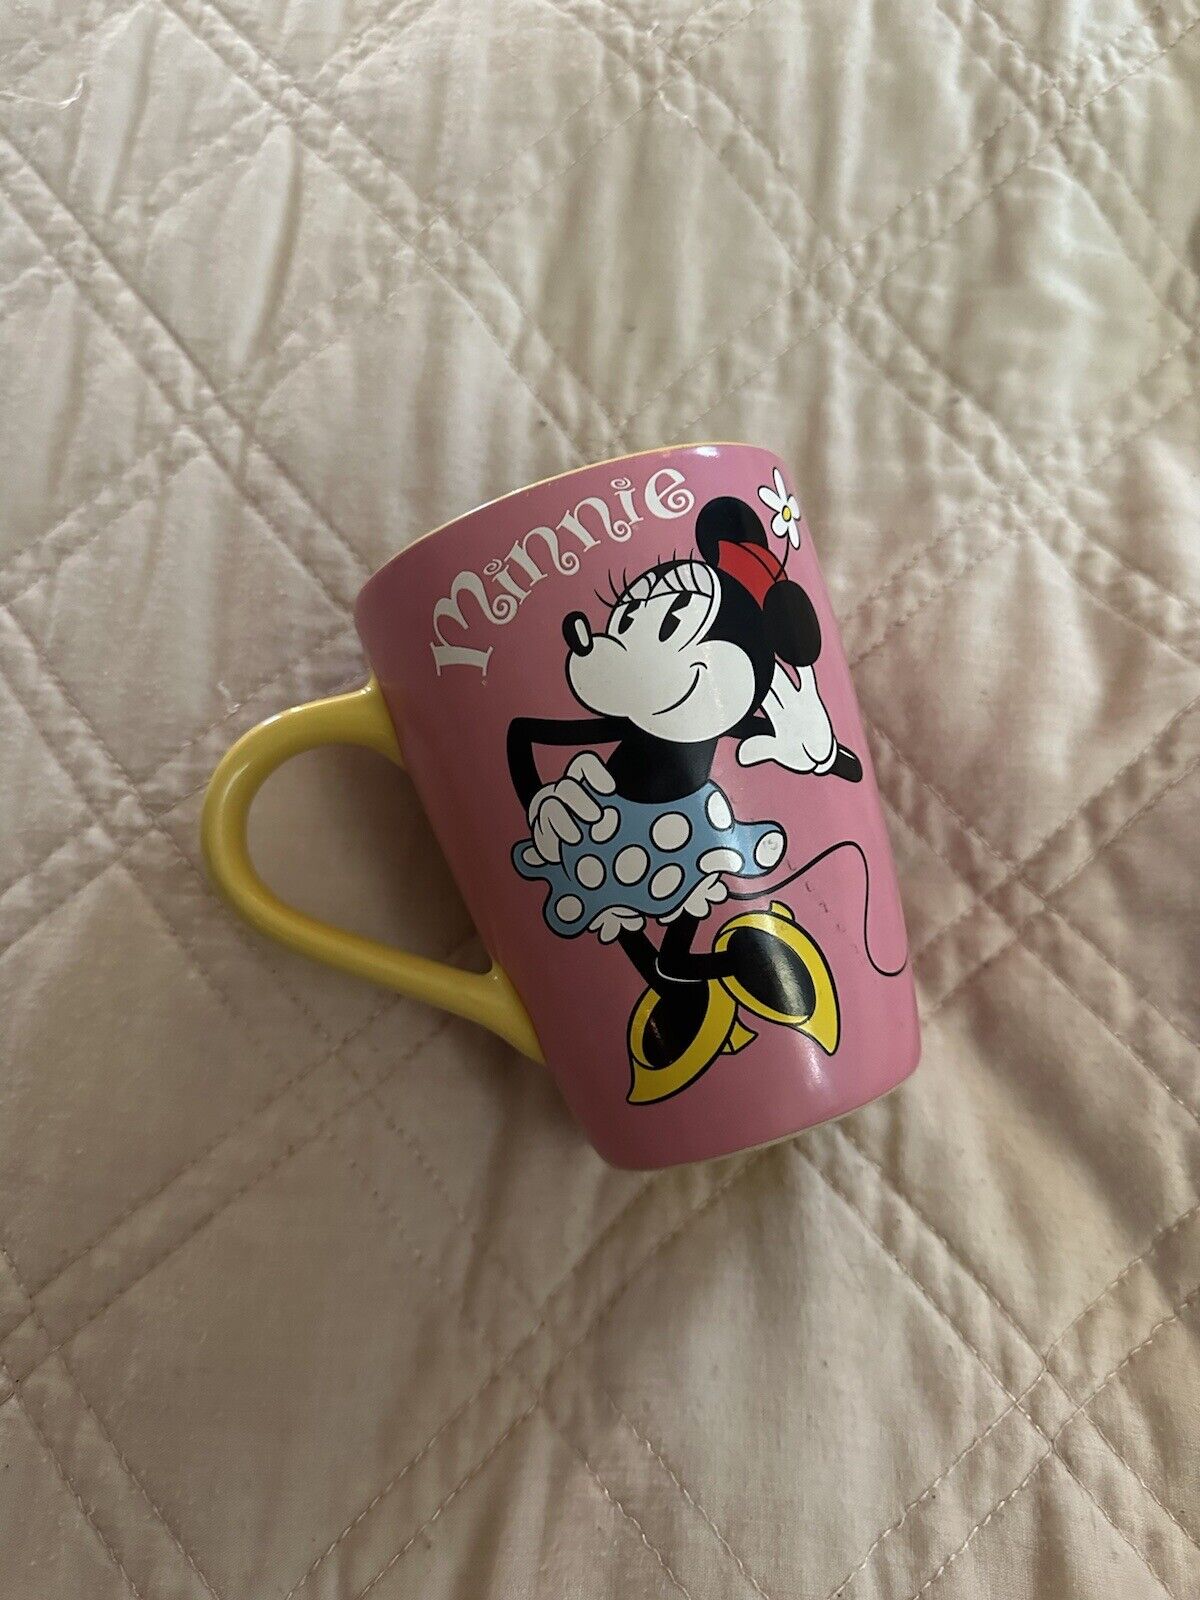 Authentic Disney Store Minnie Mouse Mug Coffee Cup 2 Sided Pink Yellow 2016